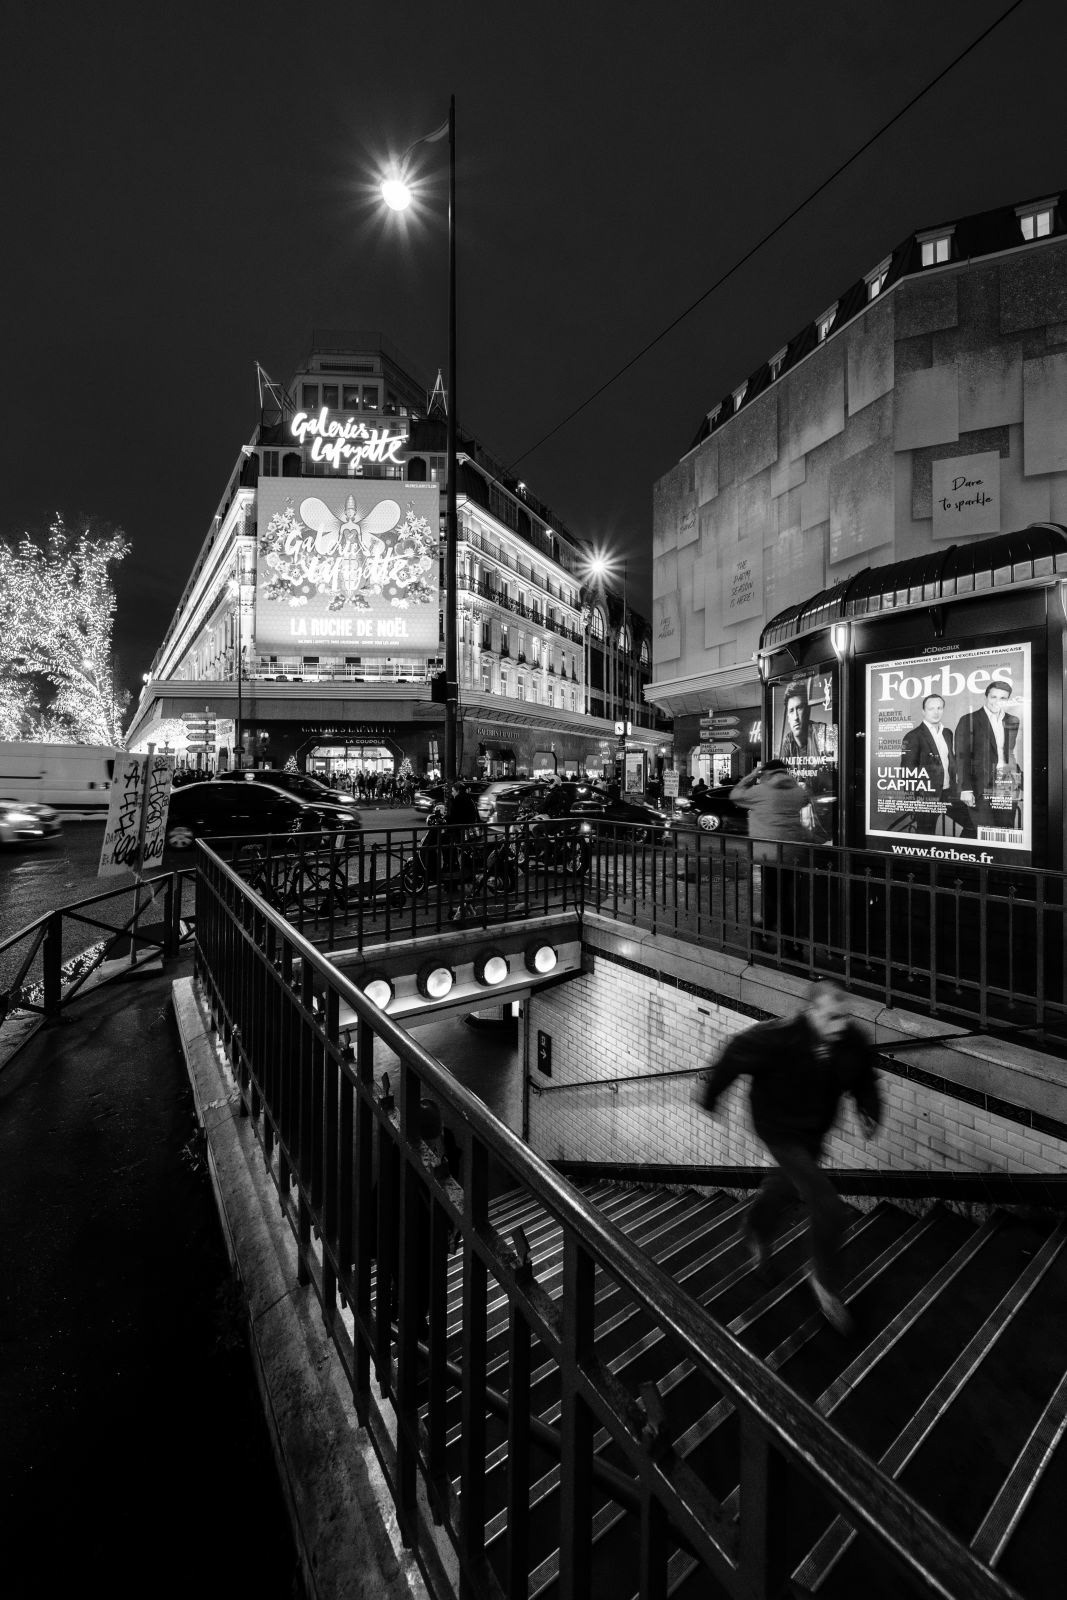 architecture city france life lost Paris people Street street photography Urban